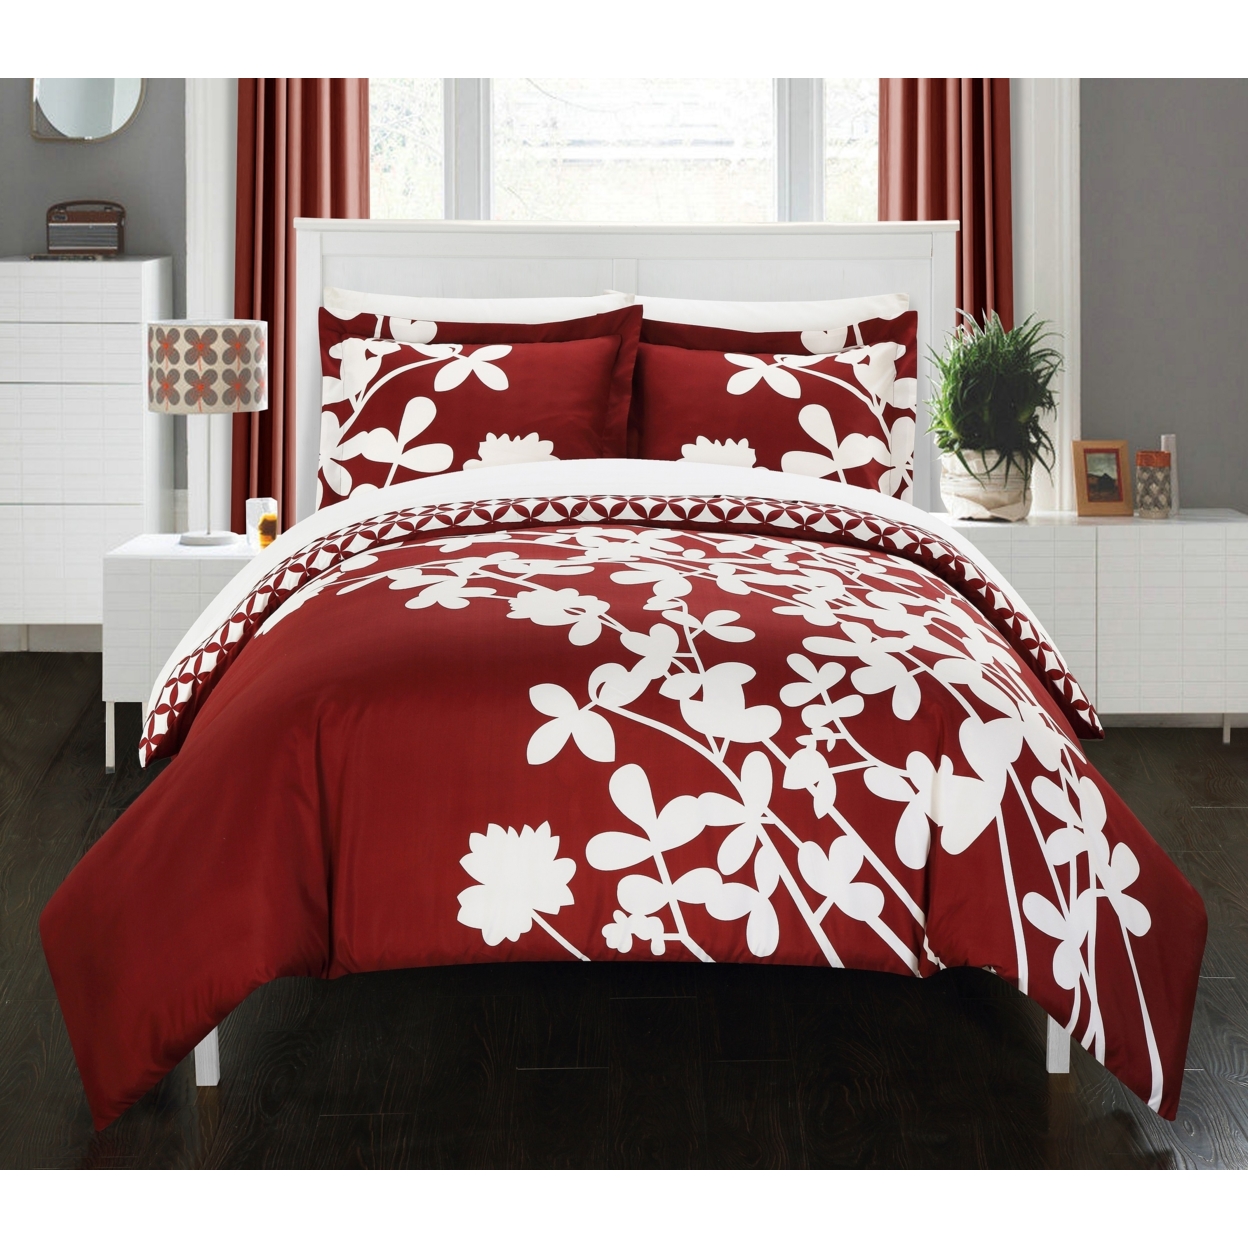 3 Piece Amaryllis Reversible Large Scale Floral Design Printed With Diamond Pattern Reverse Duvet Cover Set - Turquoise, Queen